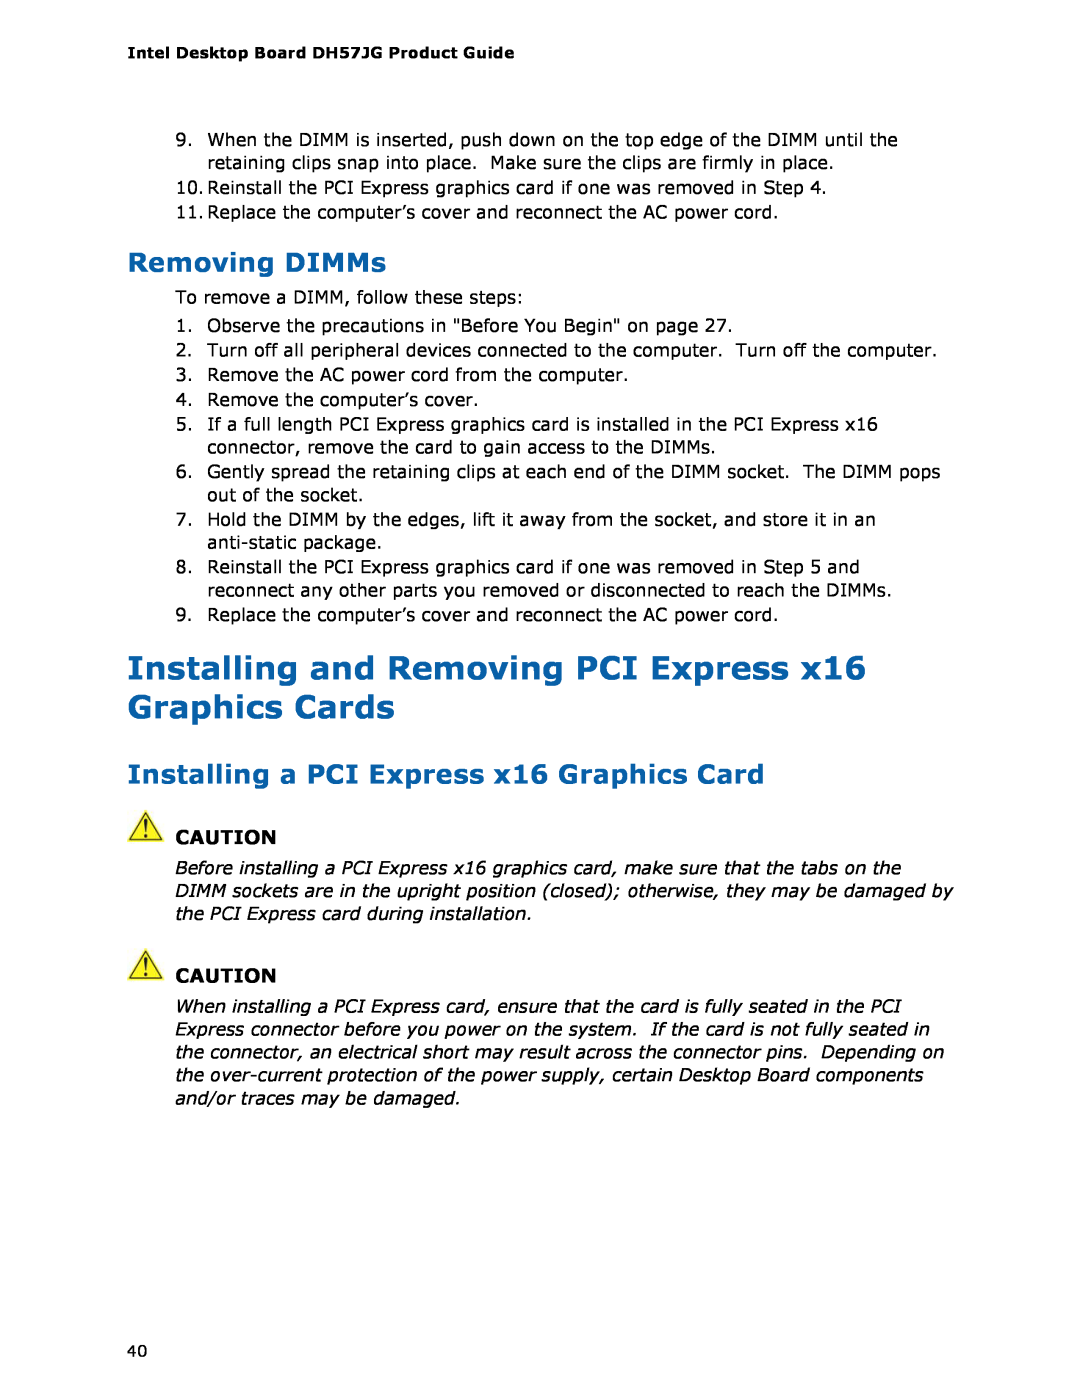 Intel BLKDH57JG manual Installing and Removing PCI Express x16 Graphics Cards, Removing DIMMs 